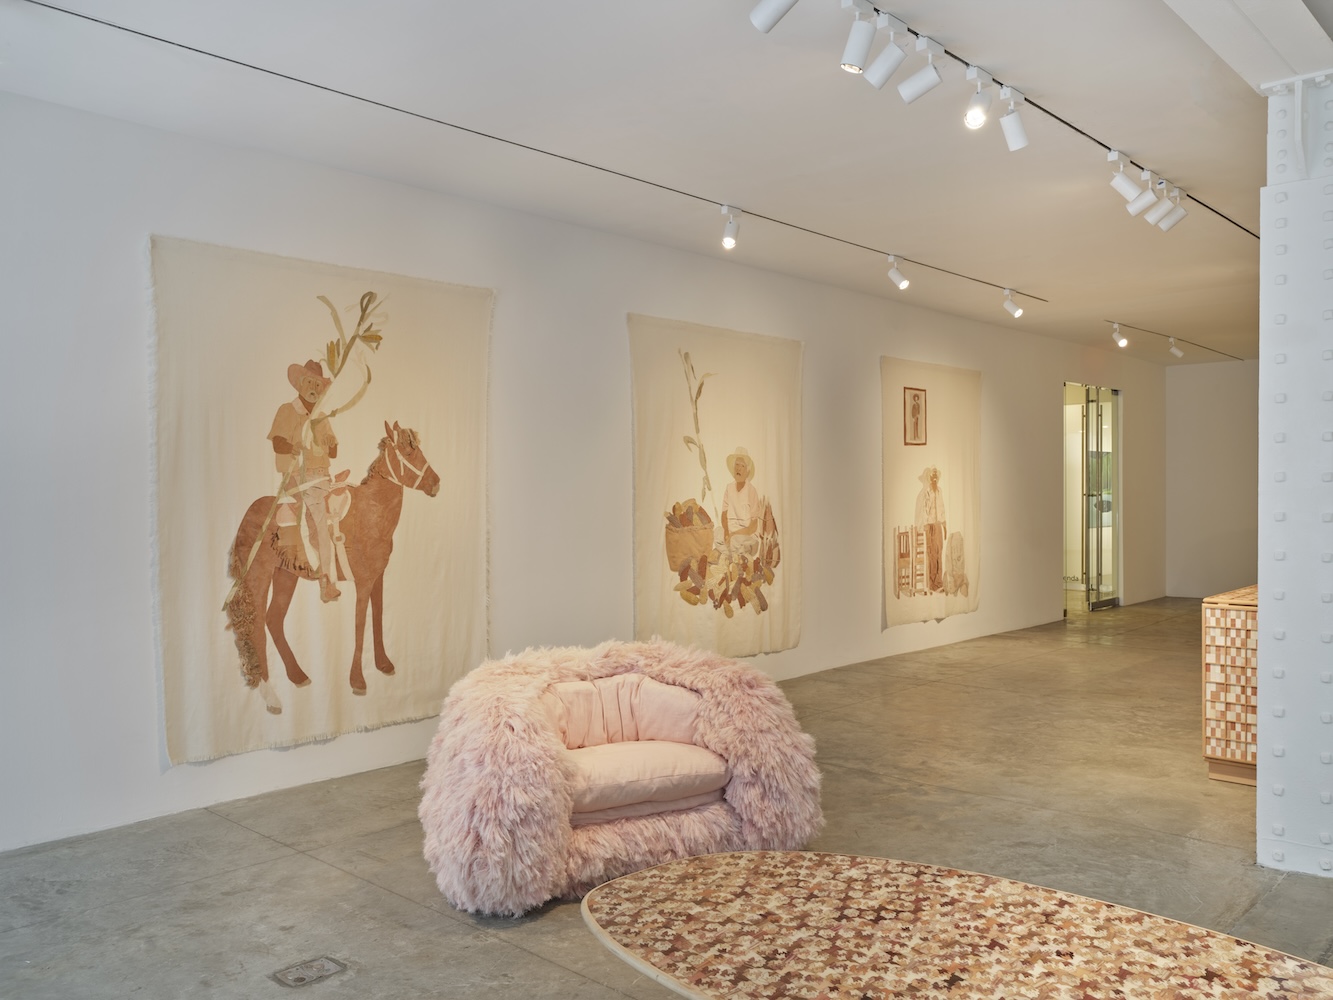 Installation view of Fernando Laposse’s Ghosts of Our Town at Friedman Benda in New York